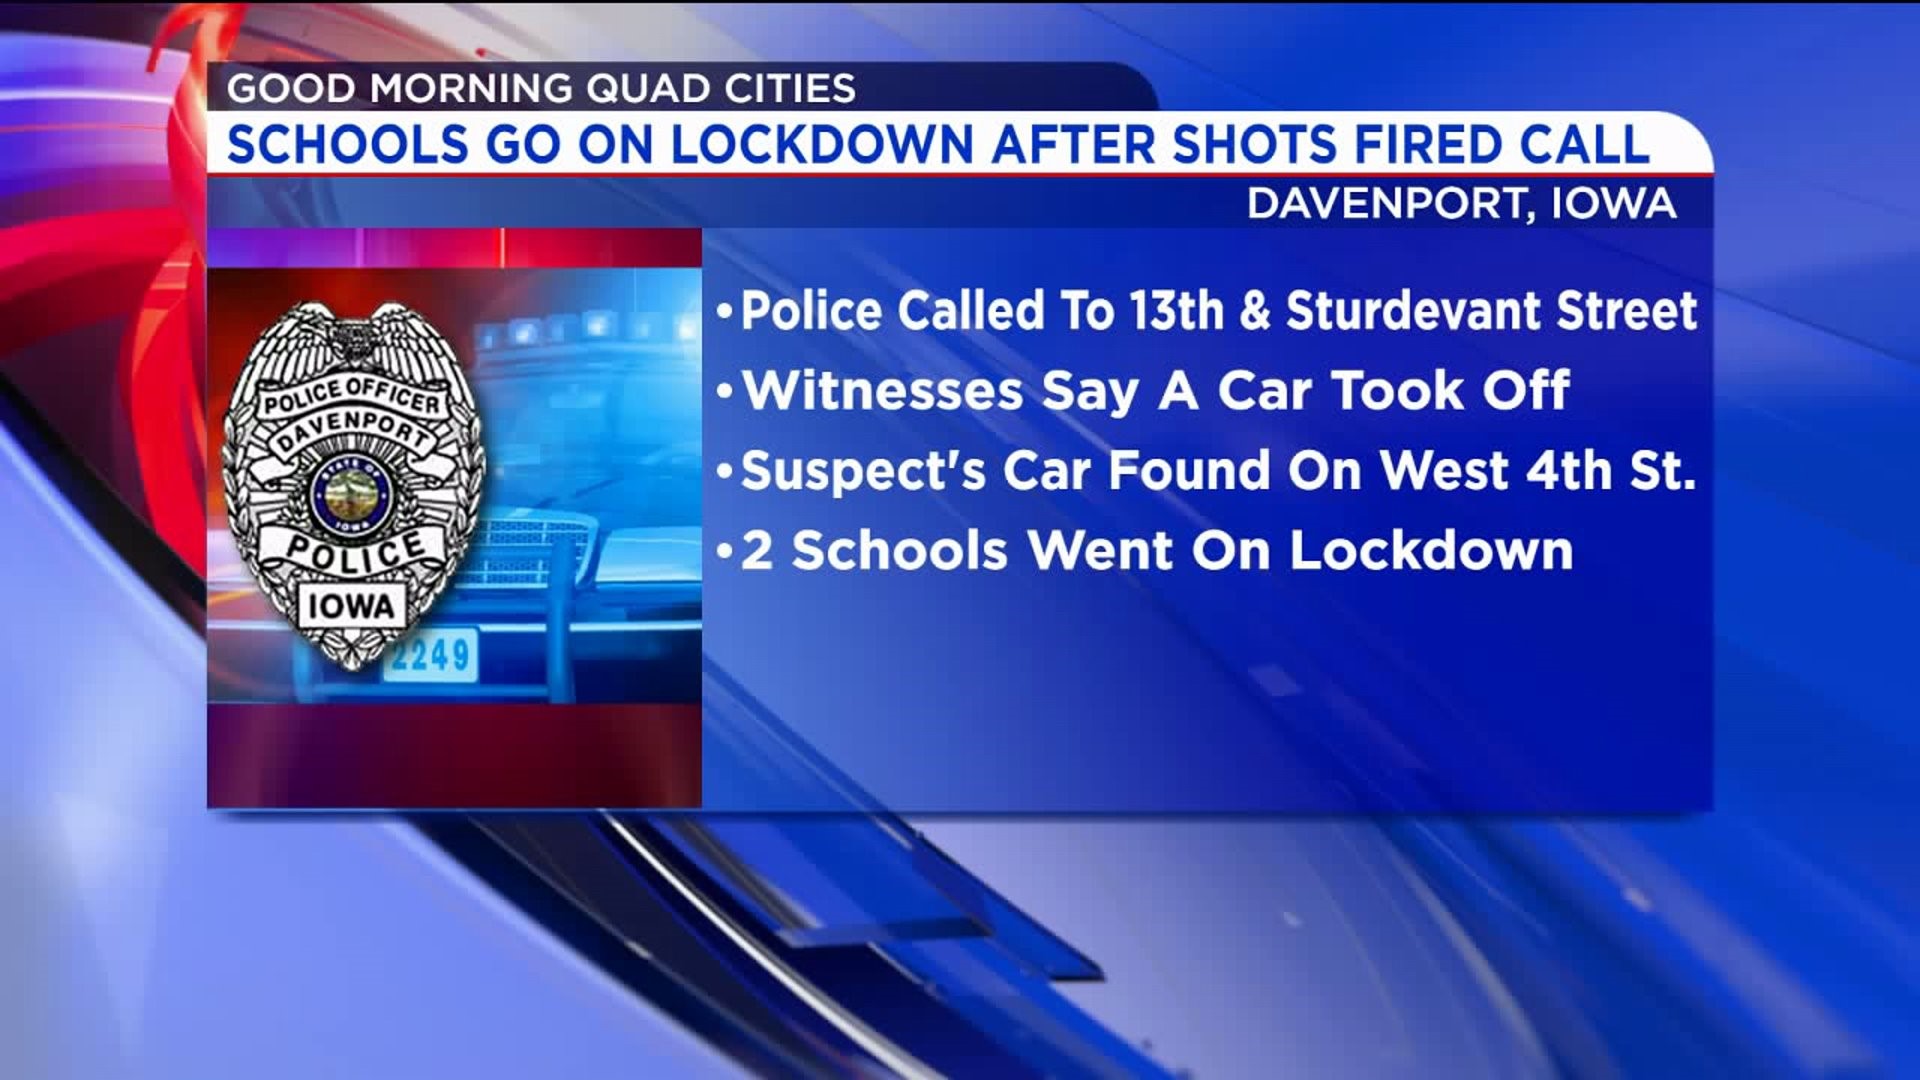 Shots fired leads to schools going on lockdown in Davenport